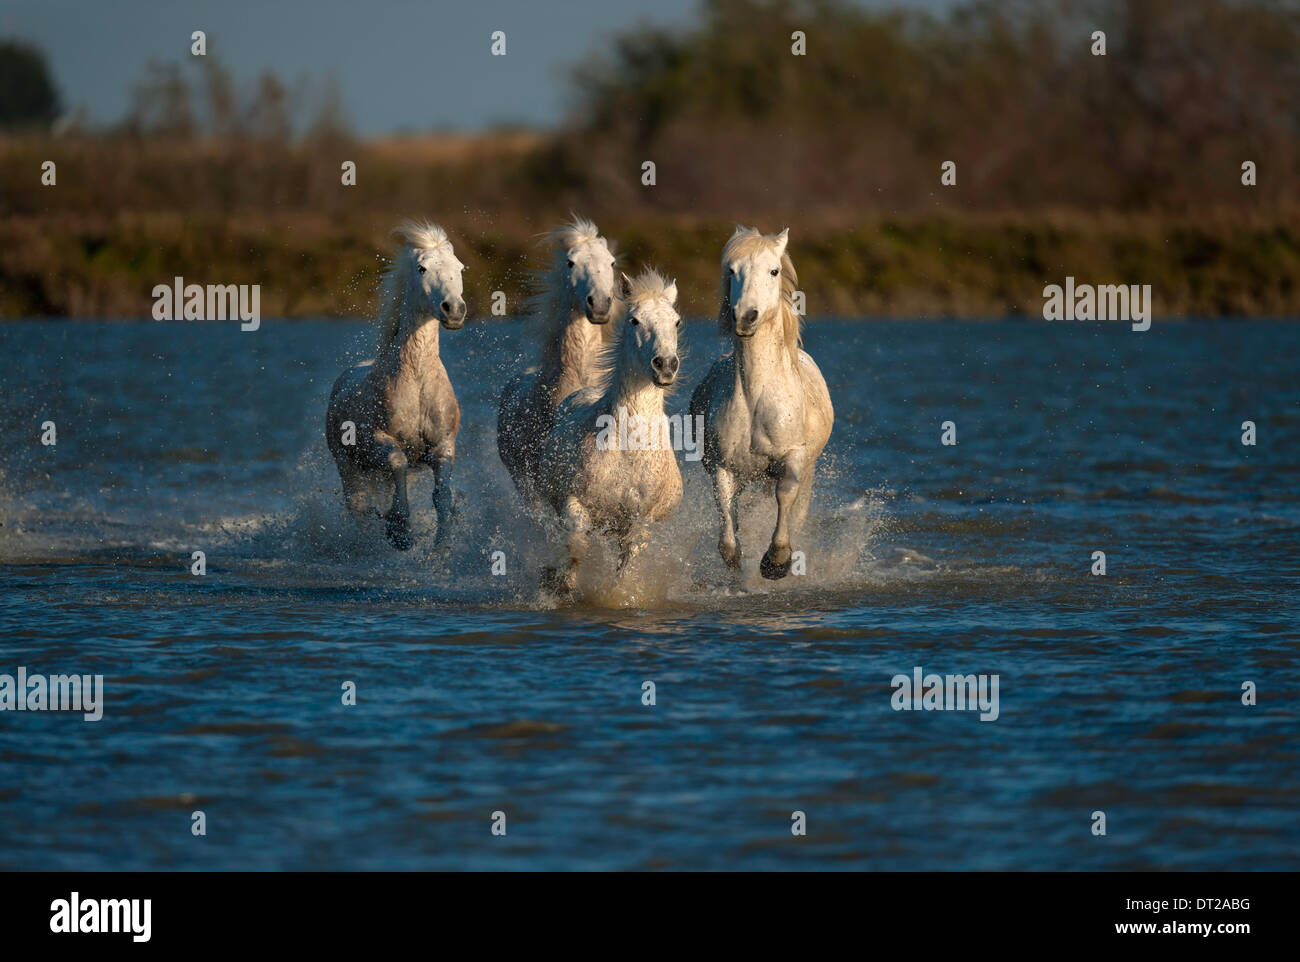 White horses running through blue water towards camera in early morning light Stock Photo